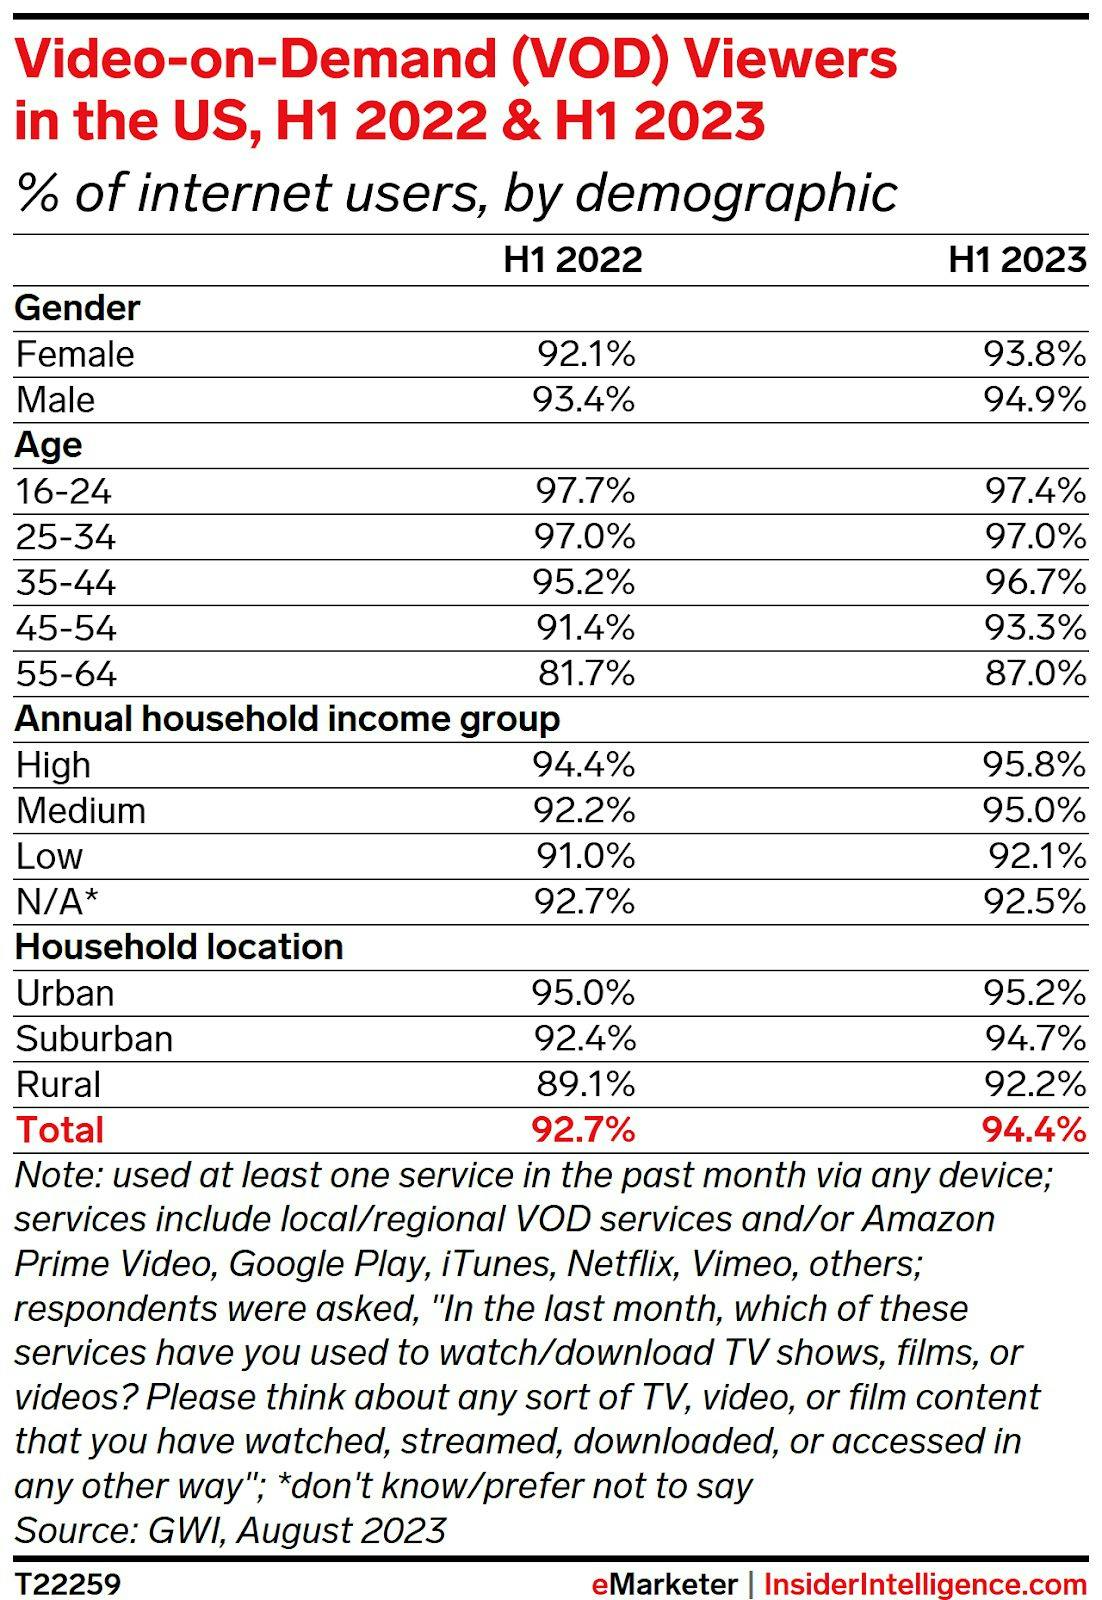 Video-on-demand (VOD) viewers in the US, H1 2022 and H1 2023